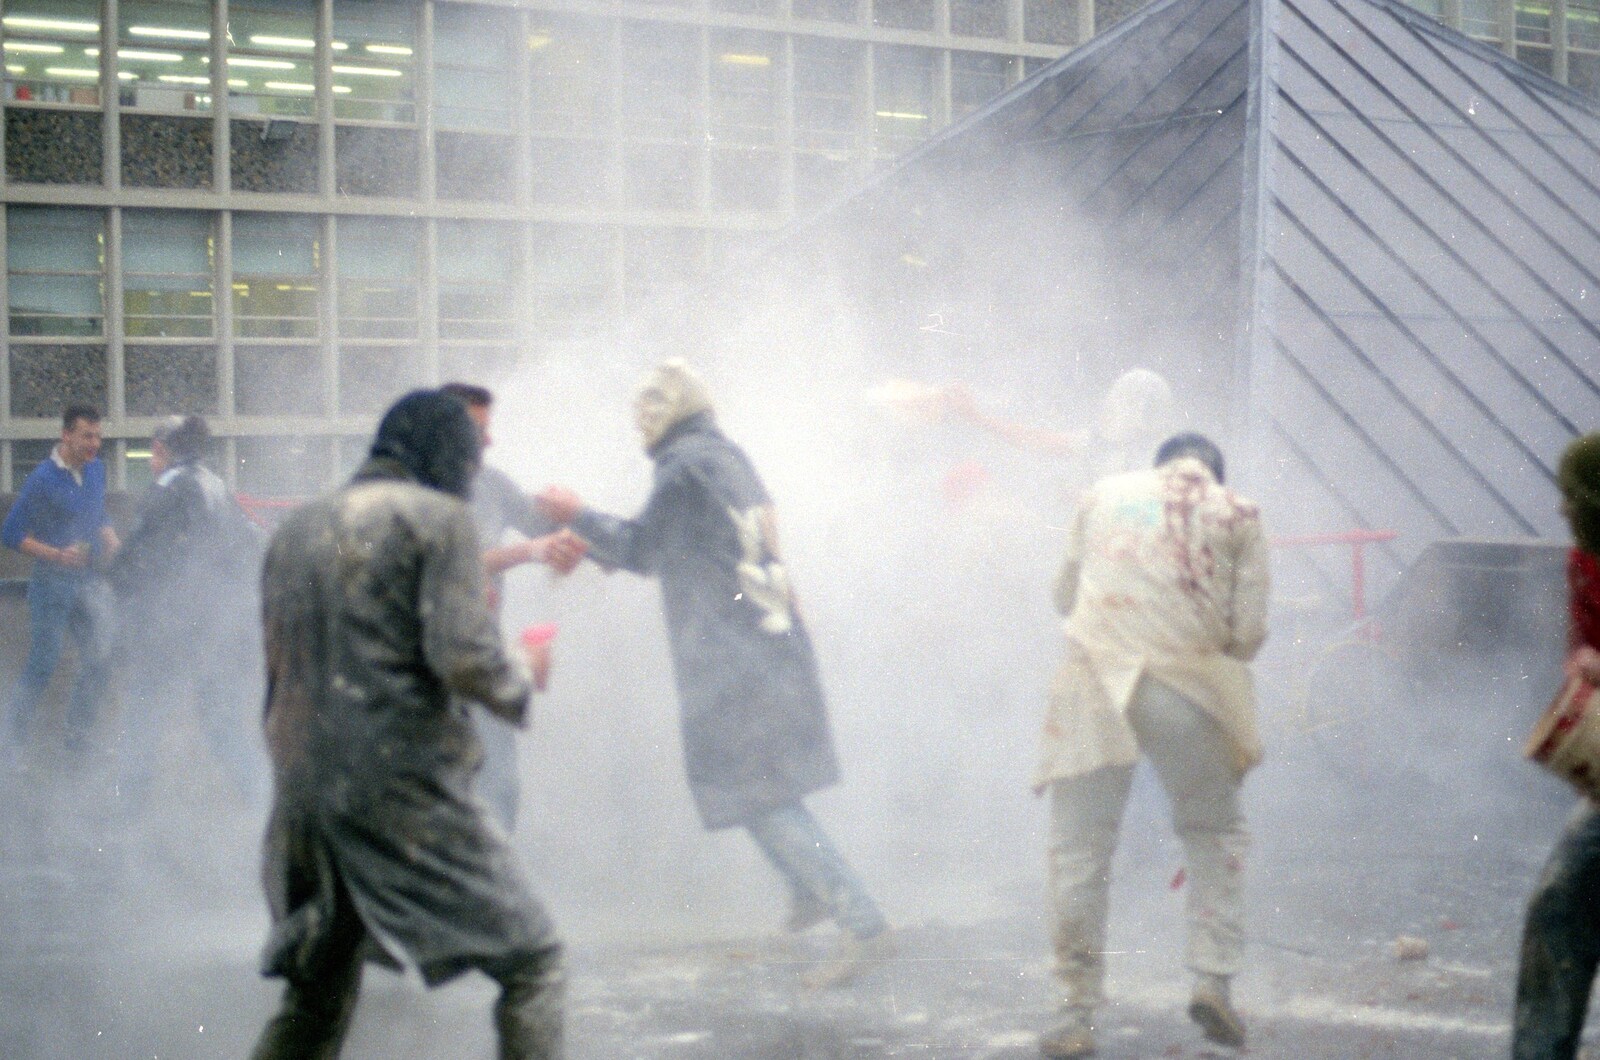 The flour battle continues from Uni: The Pirate RAG Hit Squad, Plymouth Polytechnic, Devon - 8th February 1987